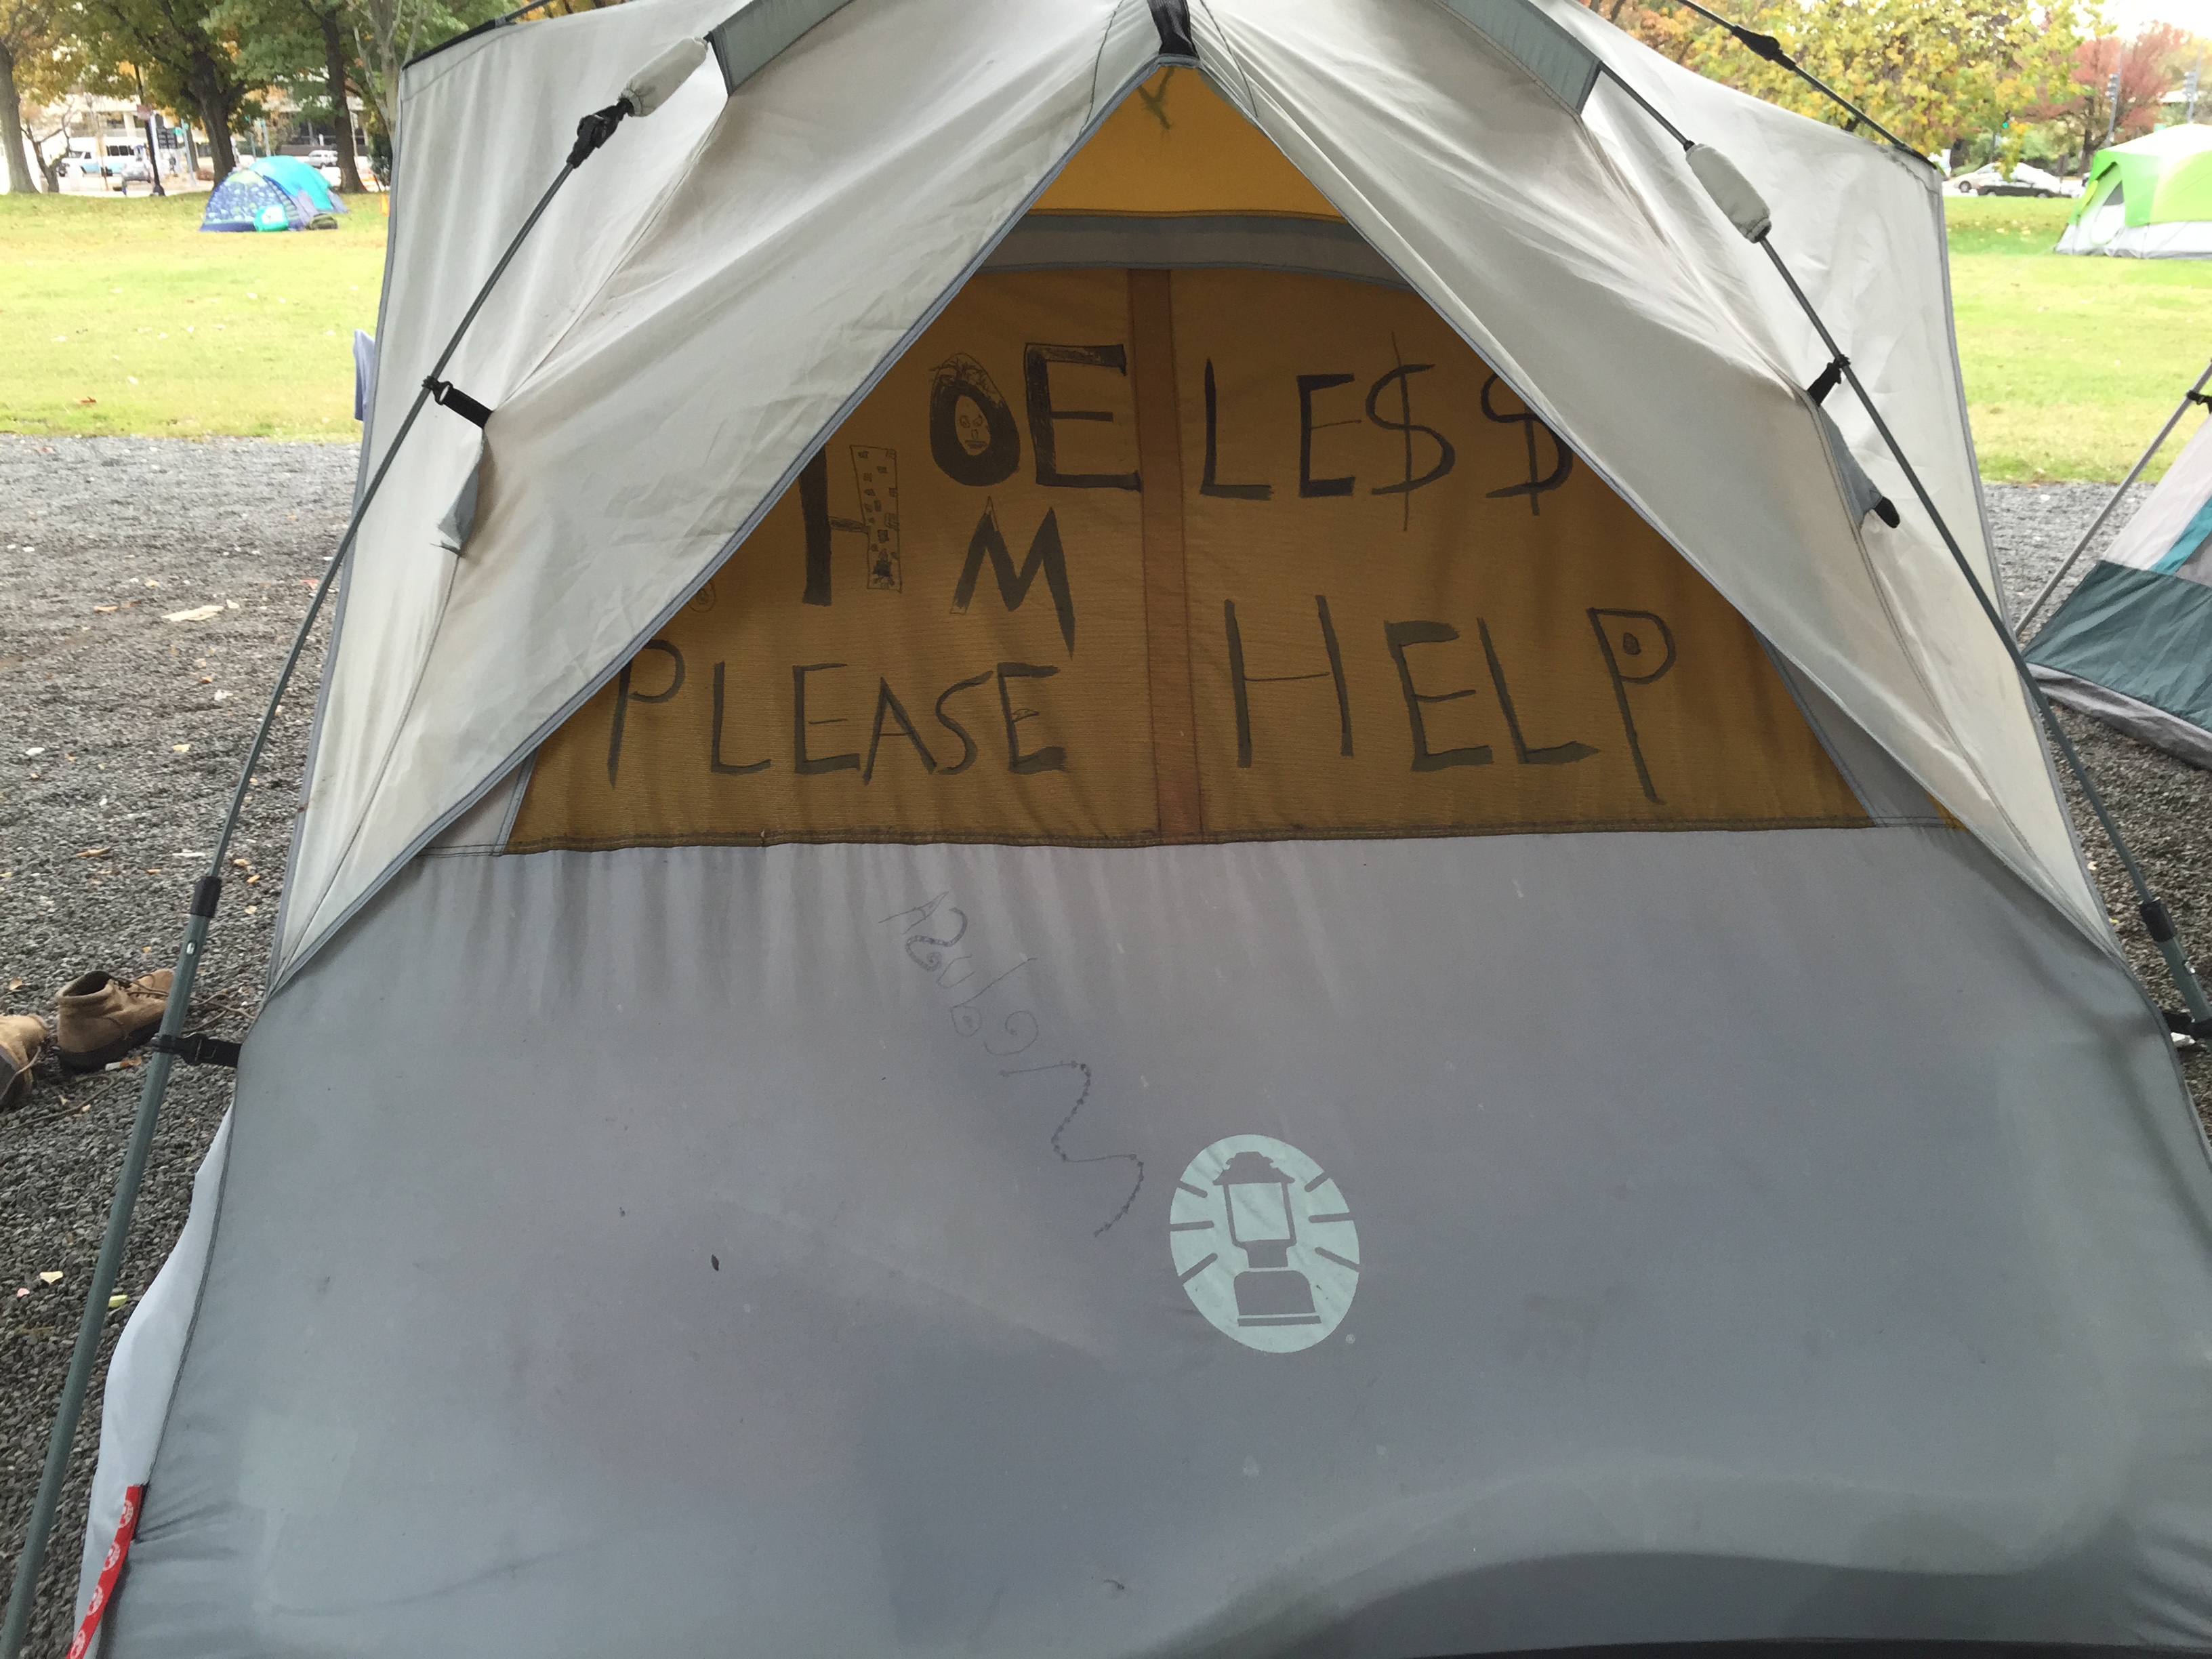 Ahead of winter, more tents at Virginia Avenue homeless camp